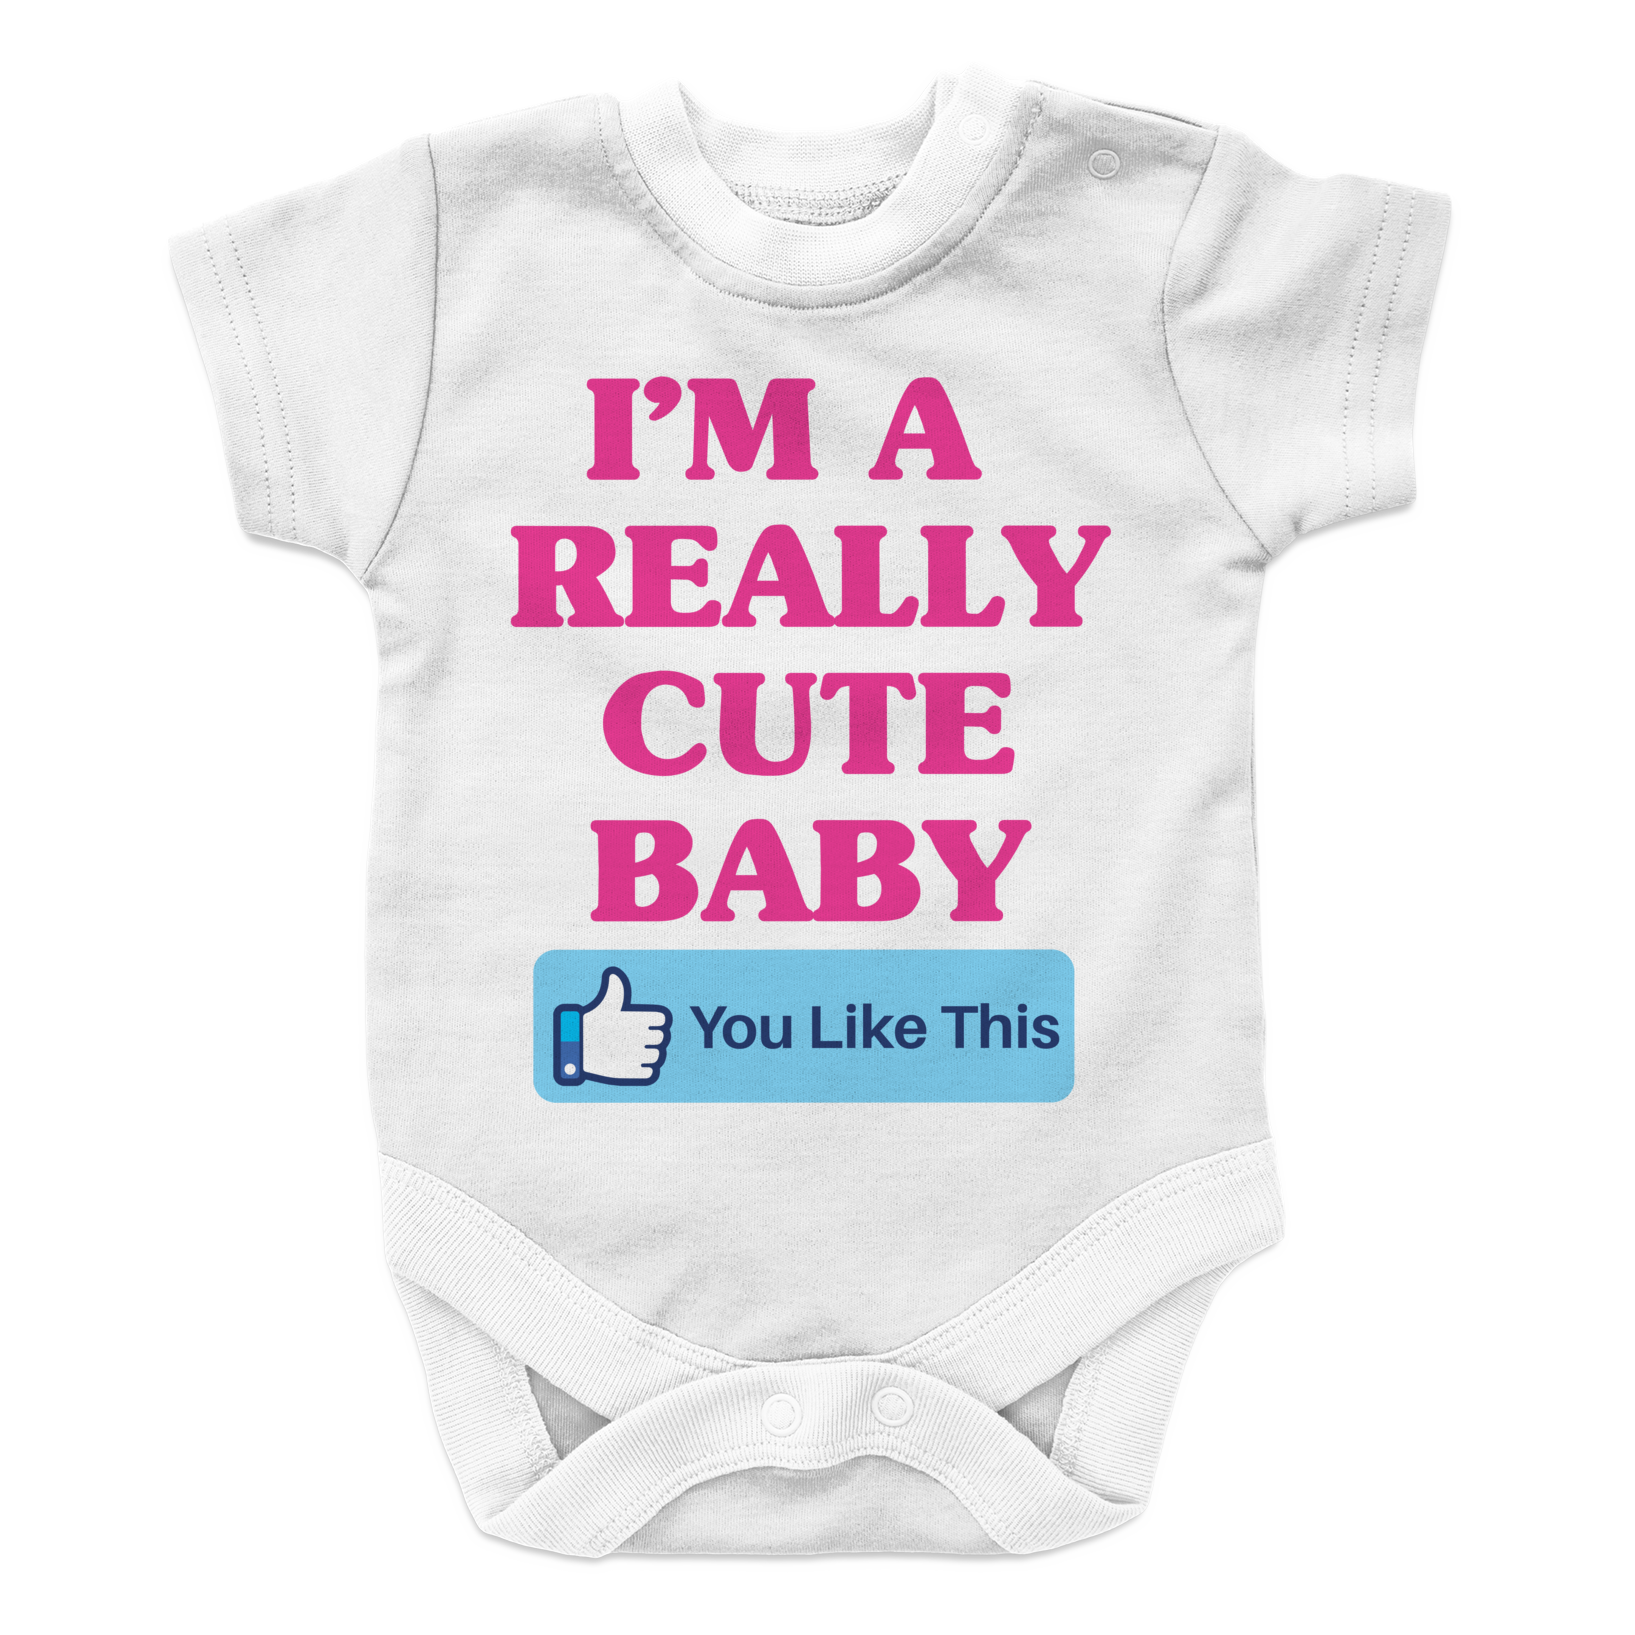 I'm A Really Cute Baby - 2 Baby Onesie